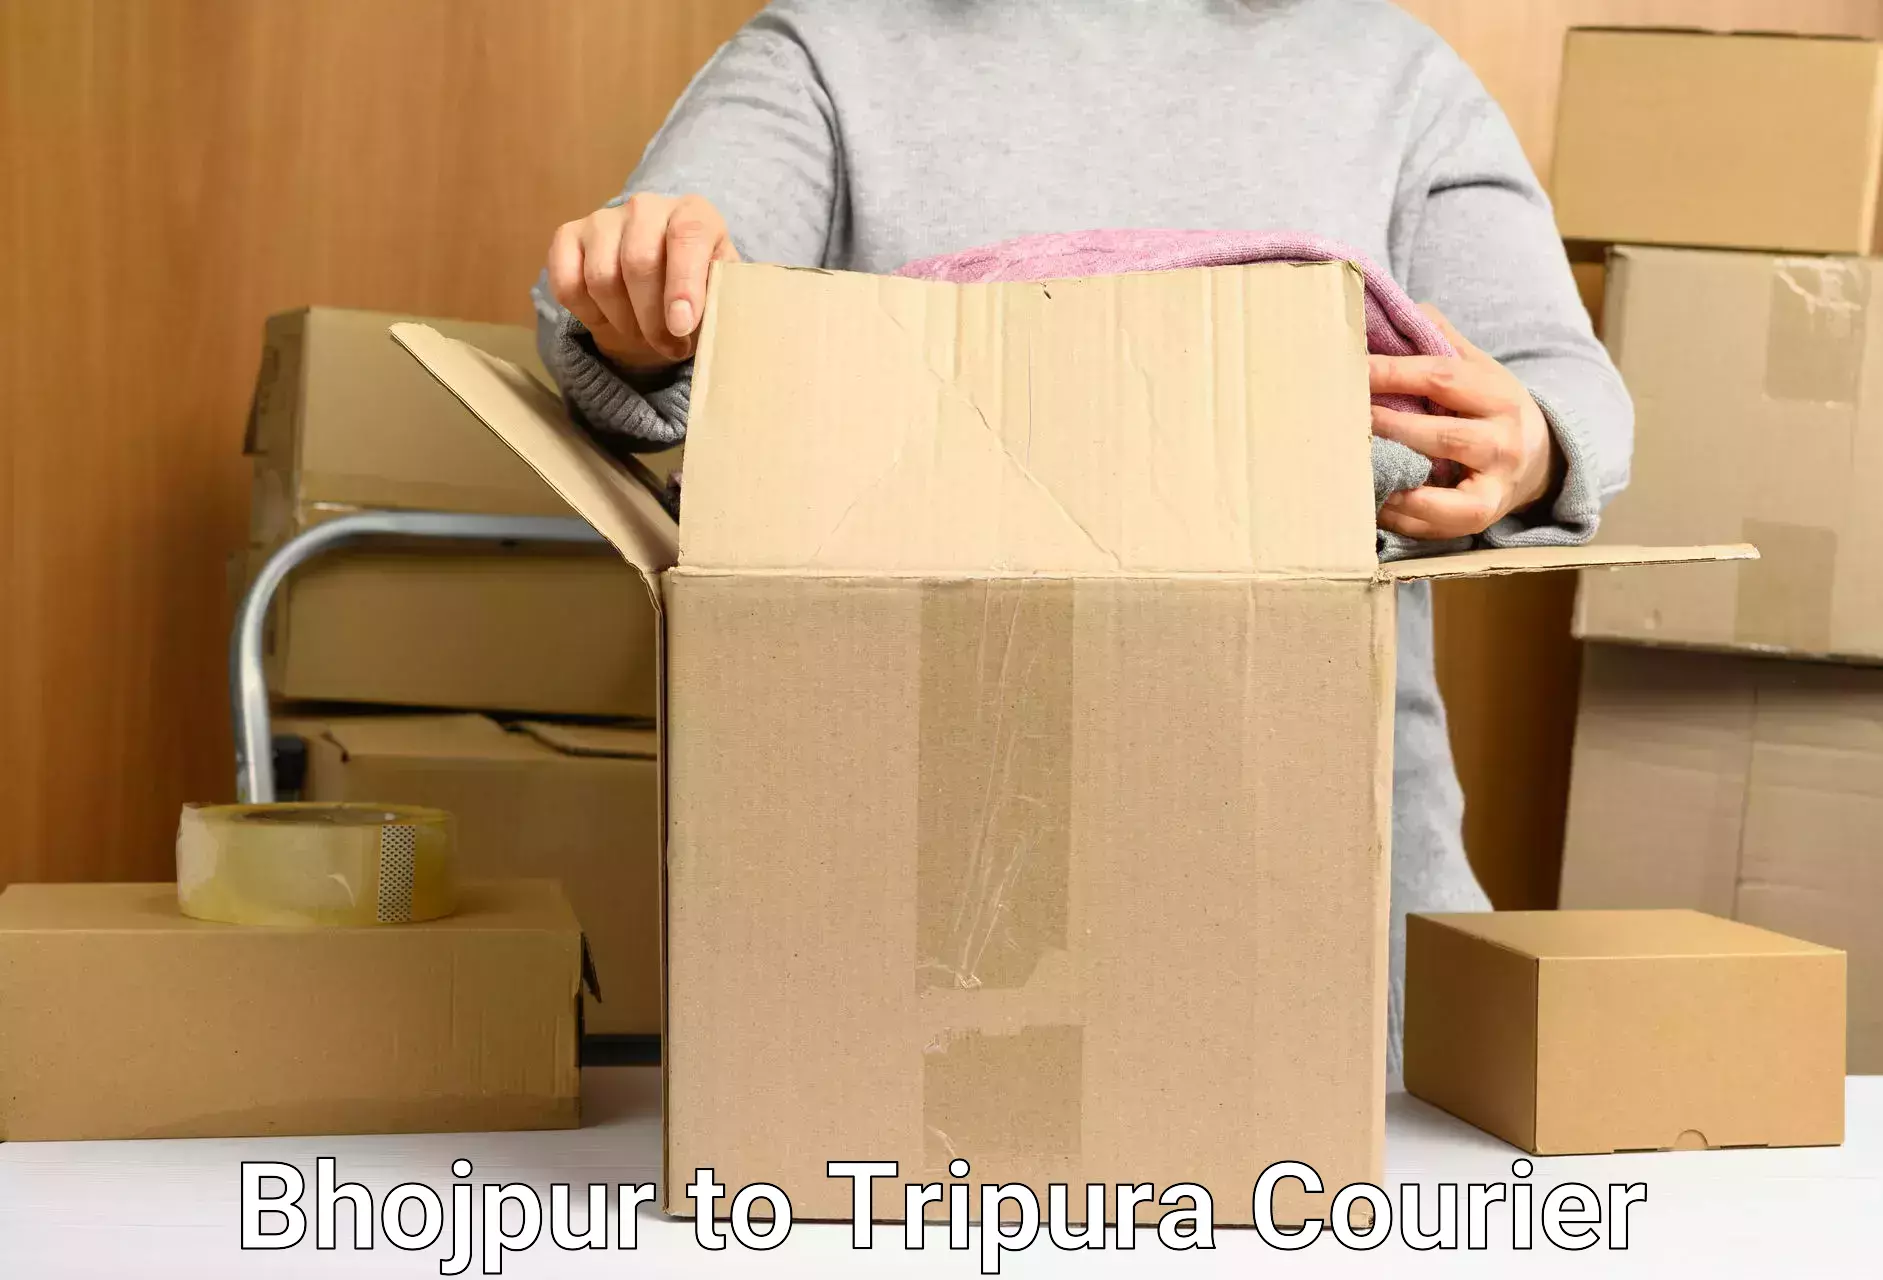 Full-service courier options Bhojpur to Udaipur Tripura